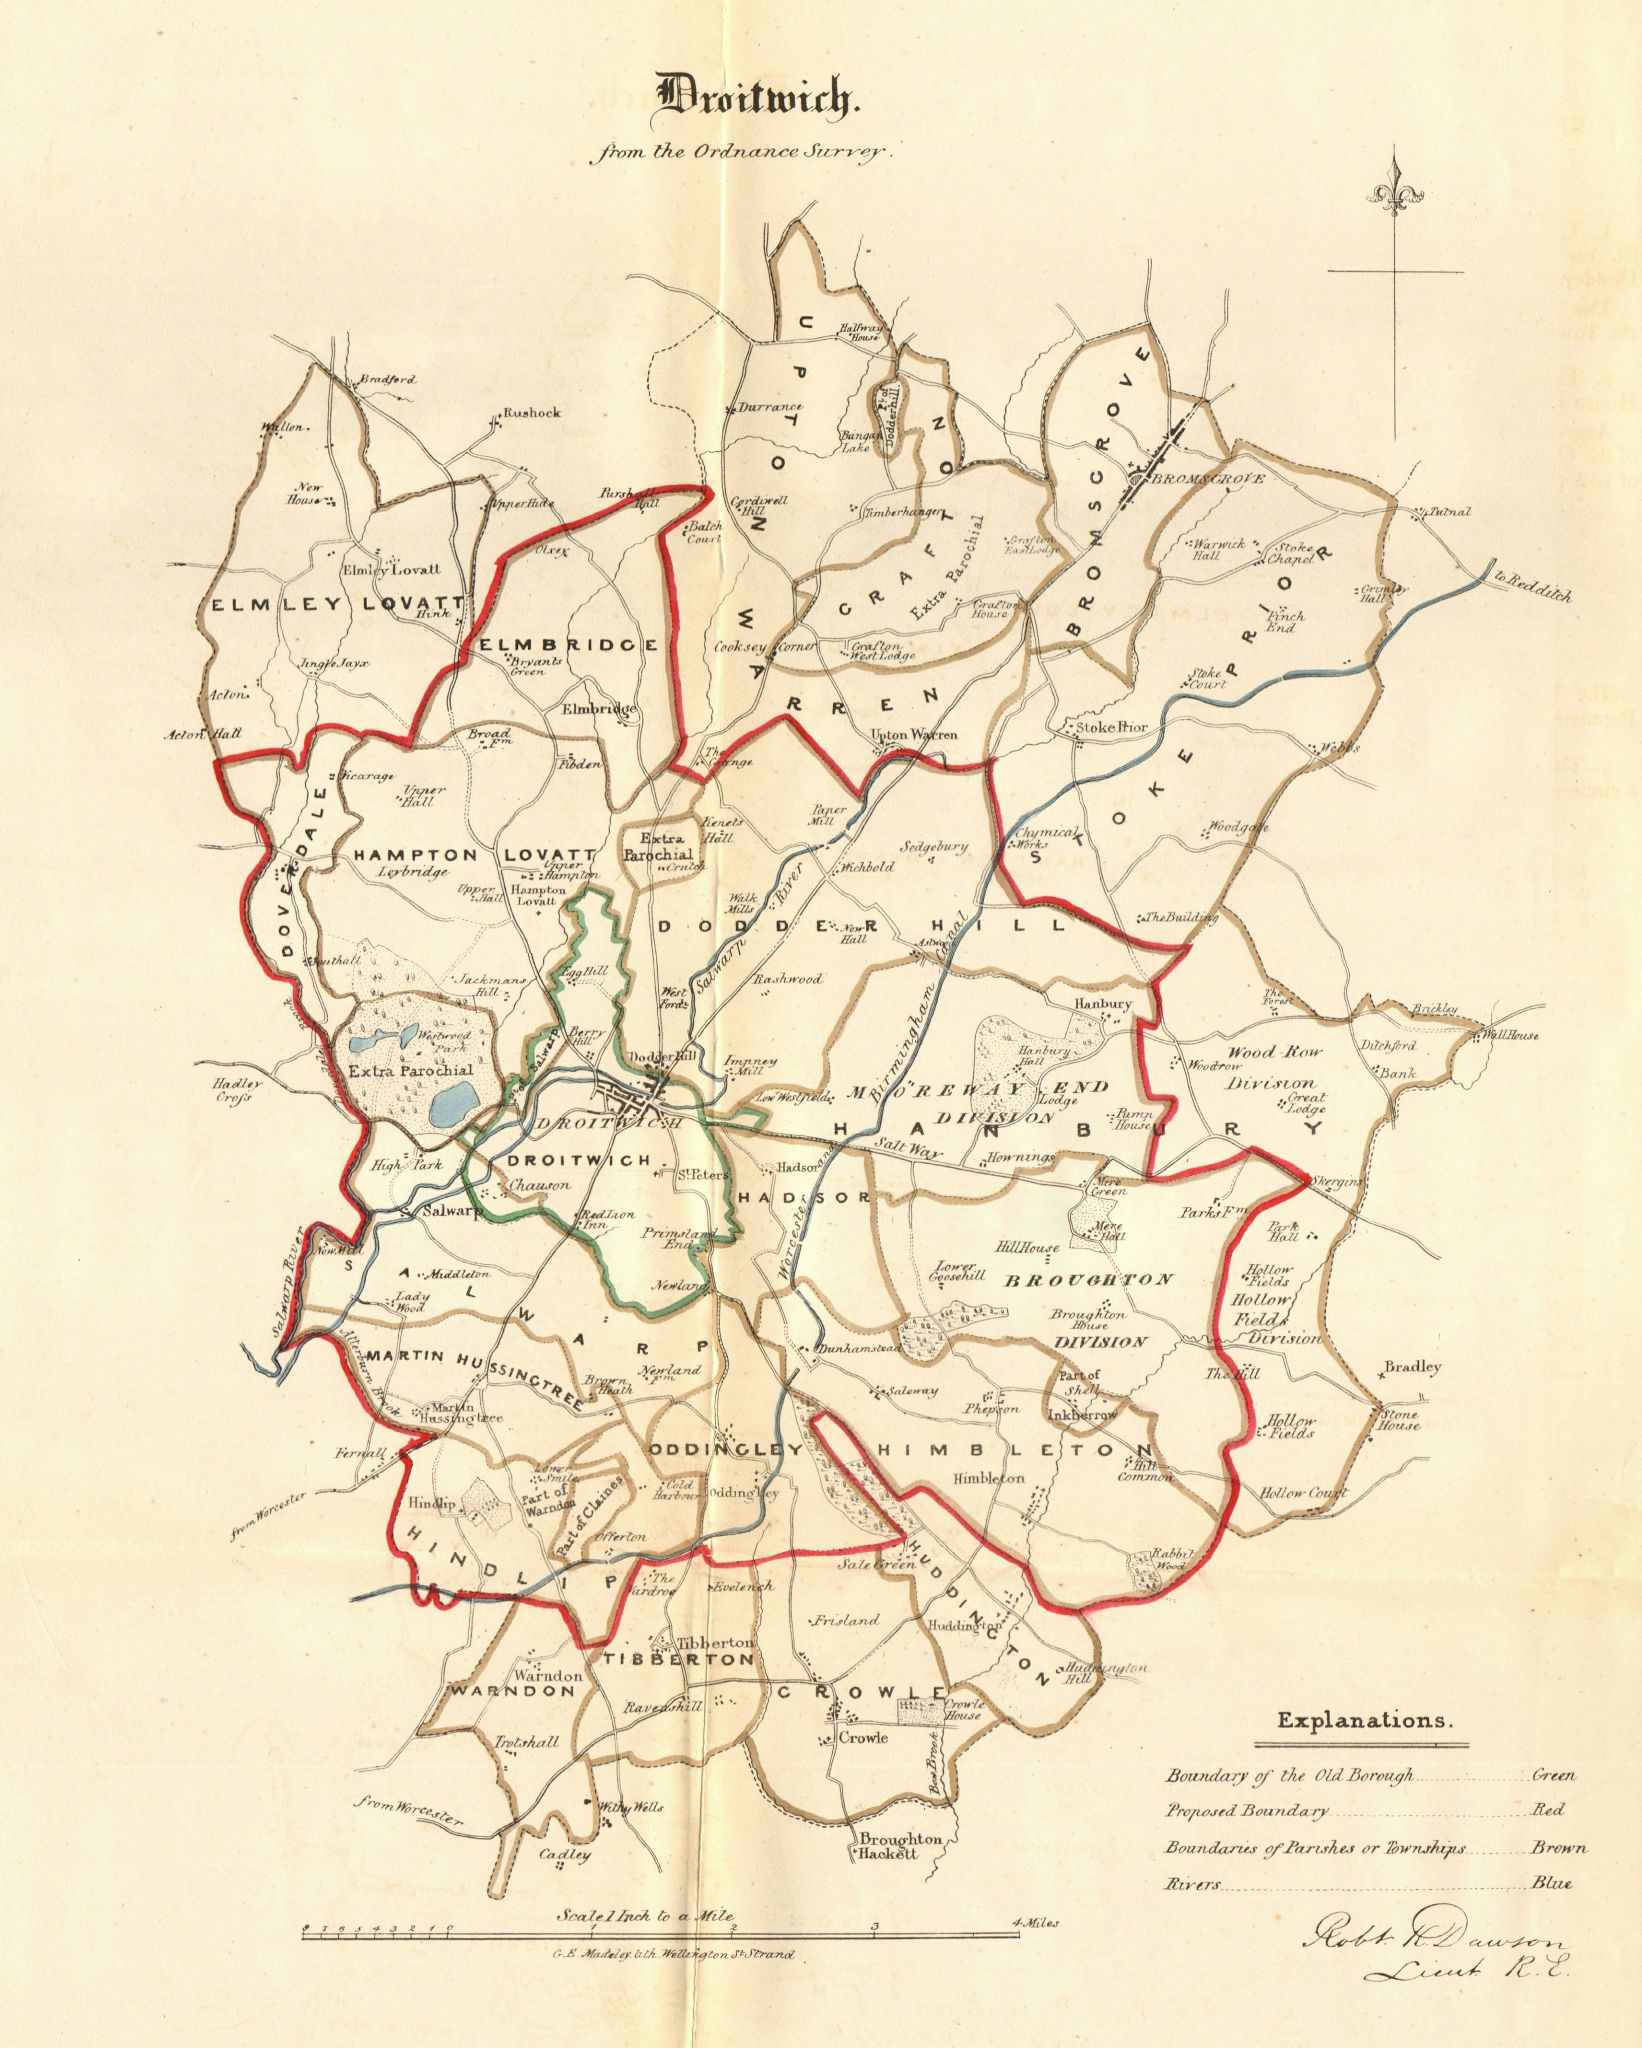 Associate Product DROITWICH borough/town plan REFORM ACT Bromsgrove Worcestershire DAWSON 1832 map